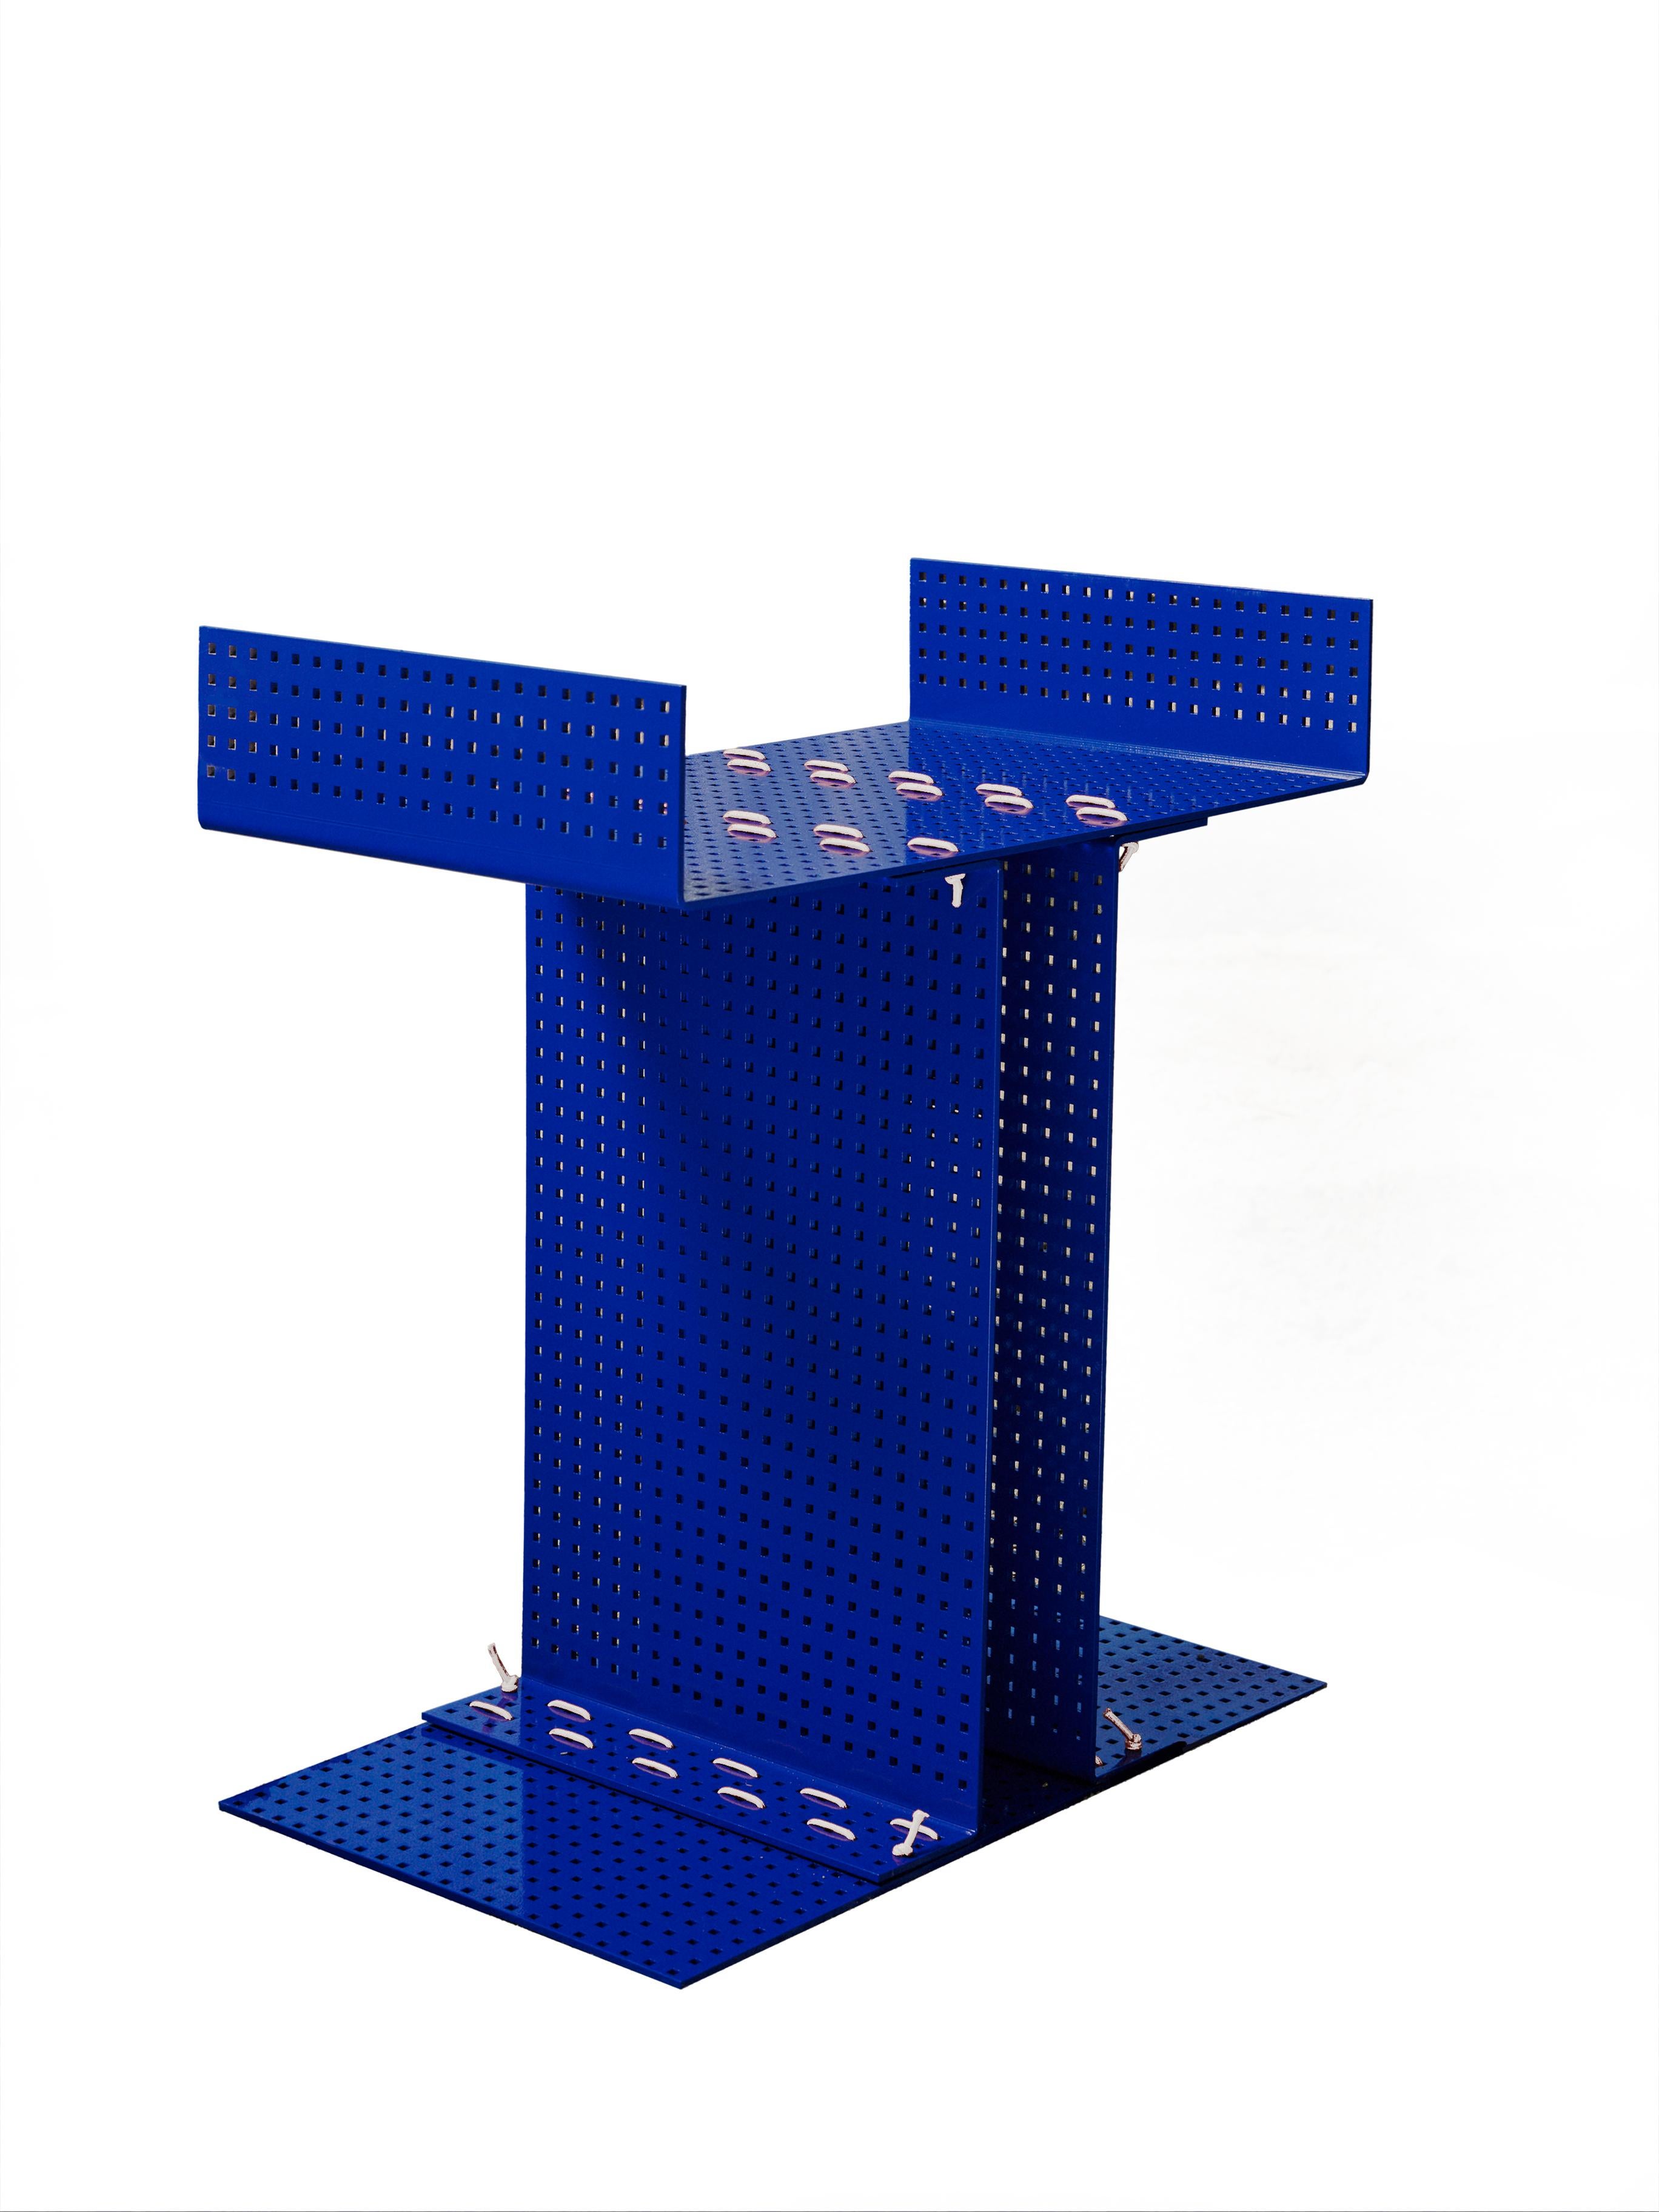 Iron blu coffee table with white strings
a piece of furniture that is defined by its user. Lina tries to find the essence of itself. A monolith made up of 4 slabs sewn together becomes a seat or a small table or they can be stacked and create a